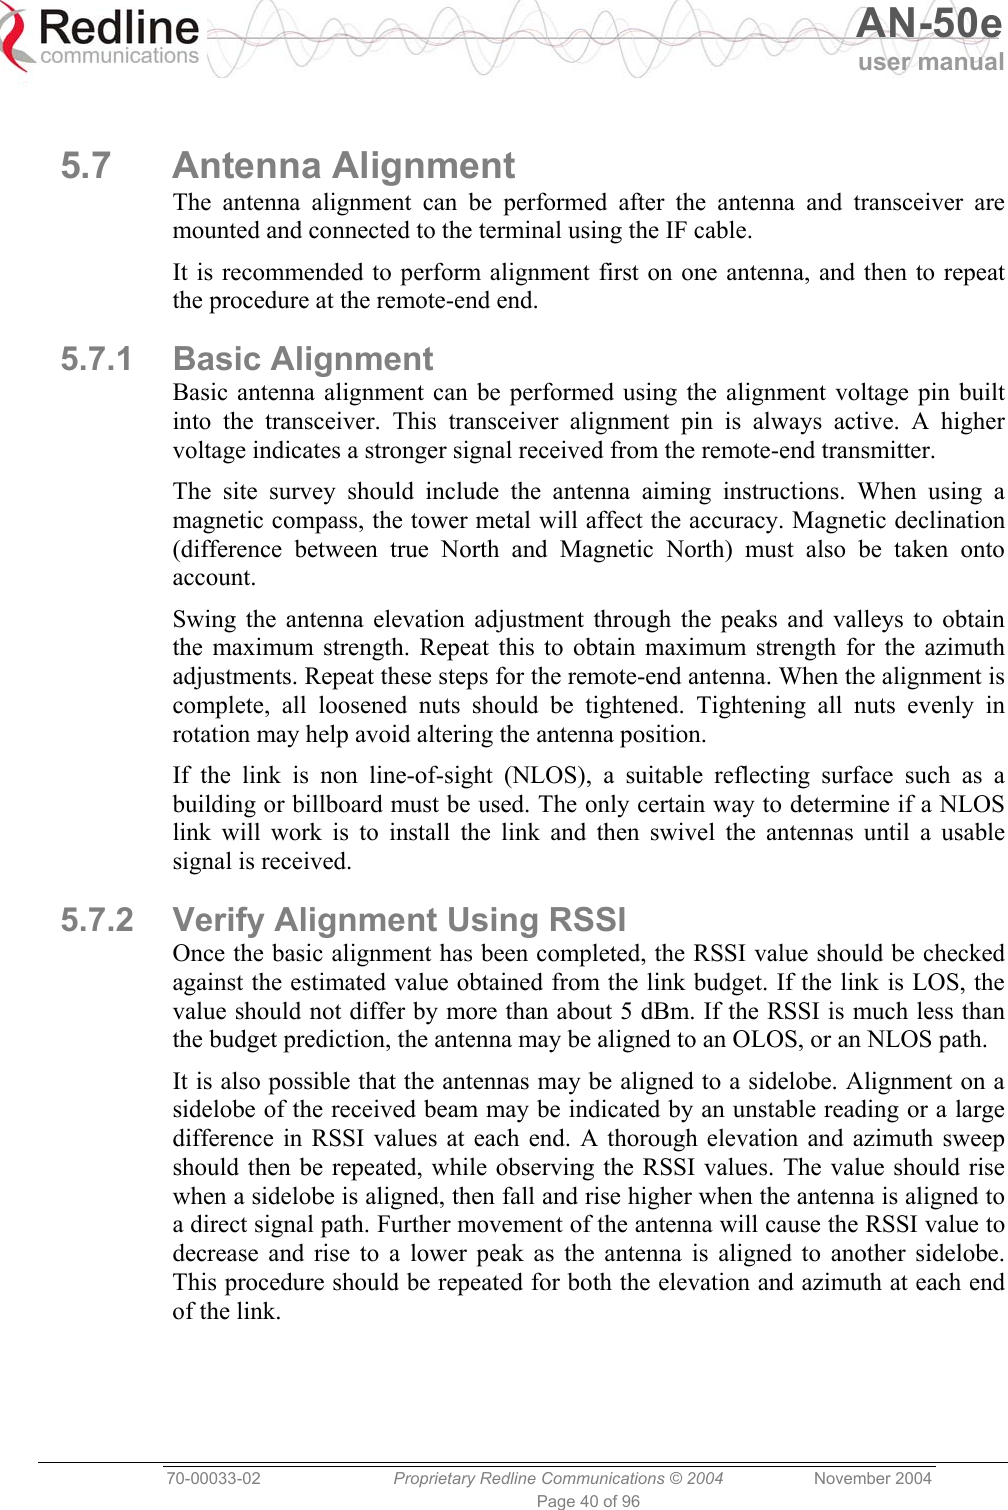   AN-50e user manual  70-00033-02  Proprietary Redline Communications © 2004 November 2004 Page 40 of 96  5.7 Antenna Alignment The antenna alignment can be performed after the antenna and transceiver are mounted and connected to the terminal using the IF cable. It is recommended to perform alignment first on one antenna, and then to repeat the procedure at the remote-end end. 5.7.1 Basic Alignment Basic antenna alignment can be performed using the alignment voltage pin built into the transceiver. This transceiver alignment pin is always active. A higher voltage indicates a stronger signal received from the remote-end transmitter. The site survey should include the antenna aiming instructions. When using a magnetic compass, the tower metal will affect the accuracy. Magnetic declination (difference between true North and Magnetic North) must also be taken onto account. Swing the antenna elevation adjustment through the peaks and valleys to obtain the maximum strength. Repeat this to obtain maximum strength for the azimuth adjustments. Repeat these steps for the remote-end antenna. When the alignment is complete, all loosened nuts should be tightened. Tightening all nuts evenly in rotation may help avoid altering the antenna position. If the link is non line-of-sight (NLOS), a suitable reflecting surface such as a building or billboard must be used. The only certain way to determine if a NLOS link will work is to install the link and then swivel the antennas until a usable signal is received. 5.7.2  Verify Alignment Using RSSI Once the basic alignment has been completed, the RSSI value should be checked against the estimated value obtained from the link budget. If the link is LOS, the value should not differ by more than about 5 dBm. If the RSSI is much less than the budget prediction, the antenna may be aligned to an OLOS, or an NLOS path.  It is also possible that the antennas may be aligned to a sidelobe. Alignment on a sidelobe of the received beam may be indicated by an unstable reading or a large difference in RSSI values at each end. A thorough elevation and azimuth sweep should then be repeated, while observing the RSSI values. The value should rise when a sidelobe is aligned, then fall and rise higher when the antenna is aligned to a direct signal path. Further movement of the antenna will cause the RSSI value to decrease and rise to a lower peak as the antenna is aligned to another sidelobe. This procedure should be repeated for both the elevation and azimuth at each end of the link.  